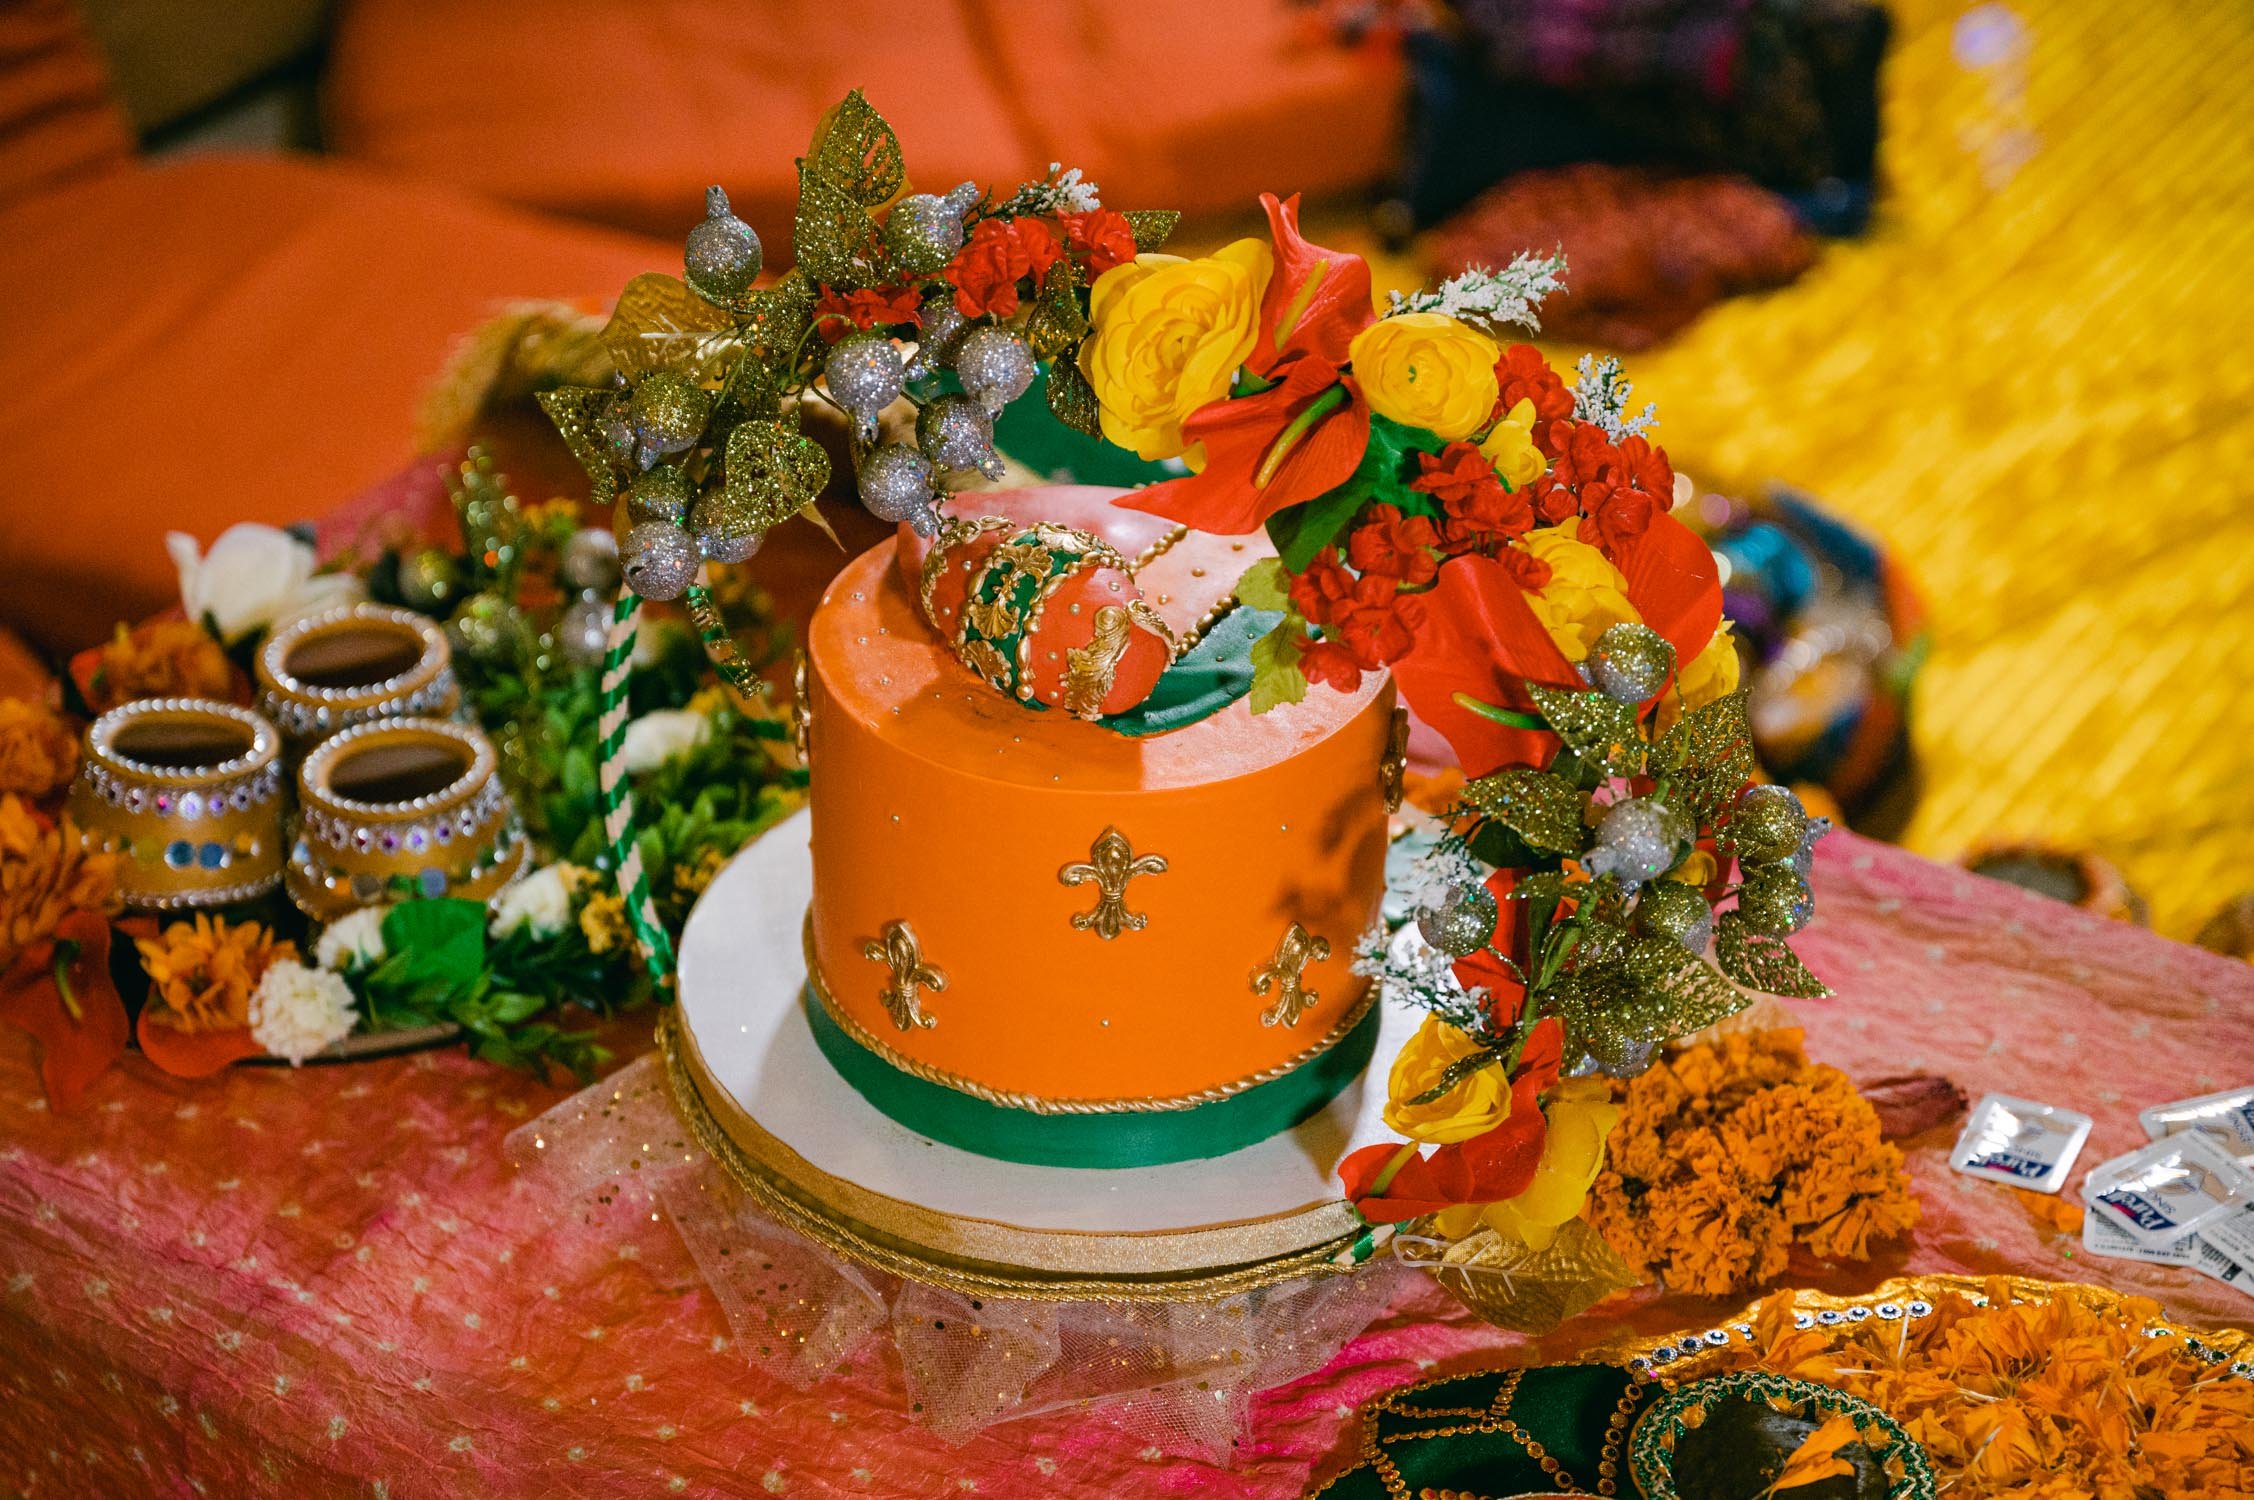 Mehendi party (Pakistani style), photo of a colorful orange cake with an egg as a topper 